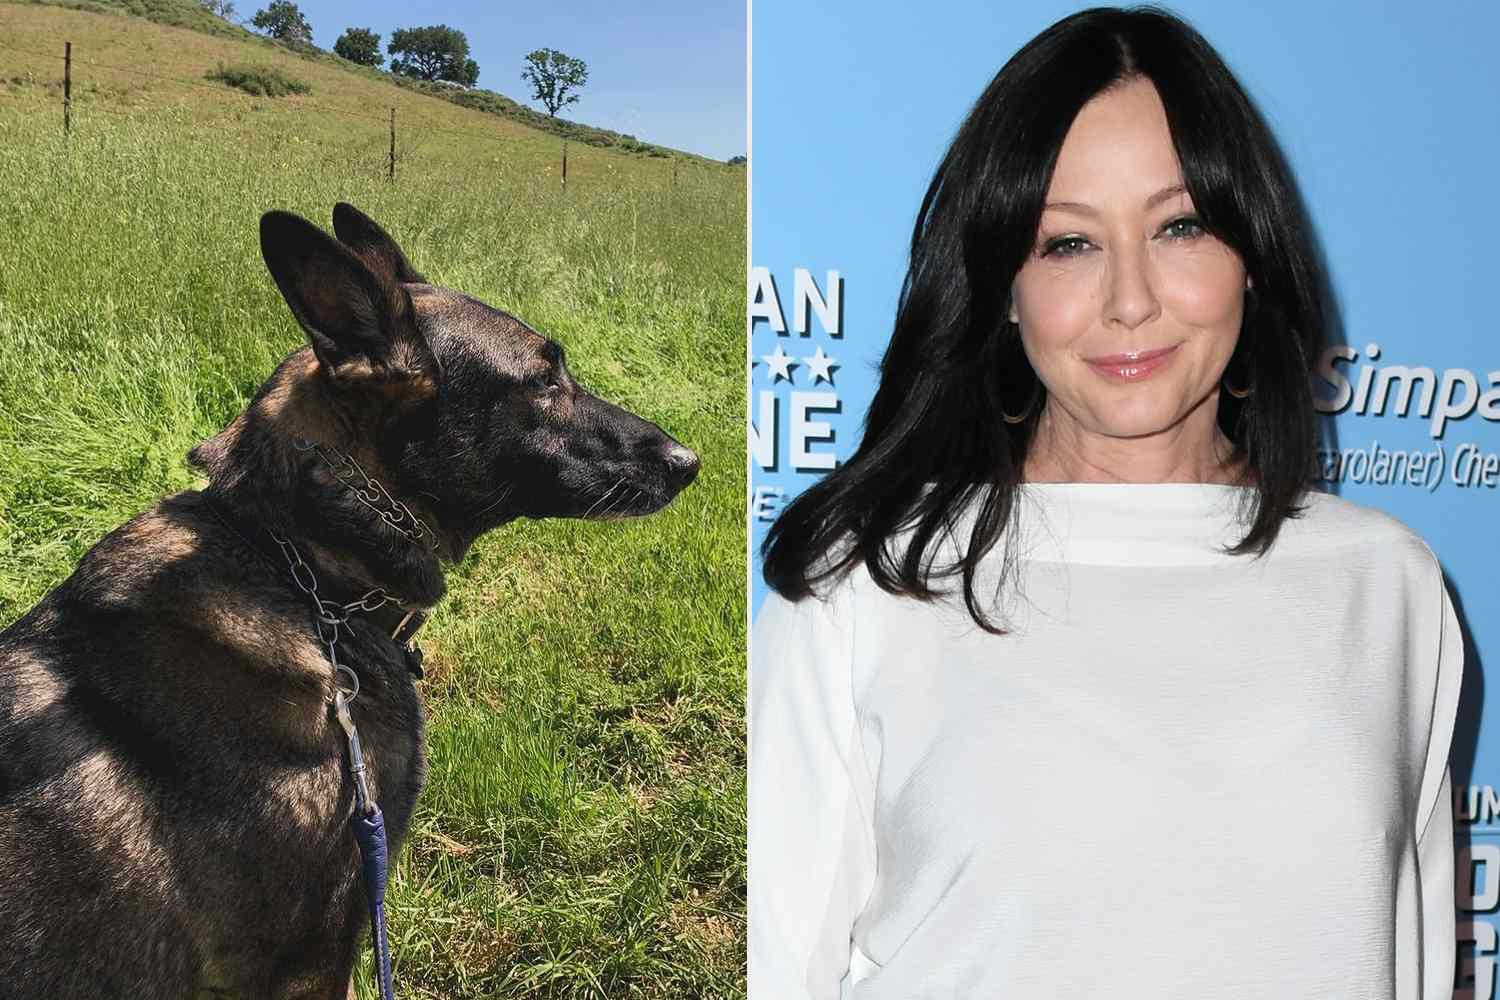 All About Shannen Doherty’s Dog Bowie, Who She Said Sensed Her Cancer Before She Was Diagnosed